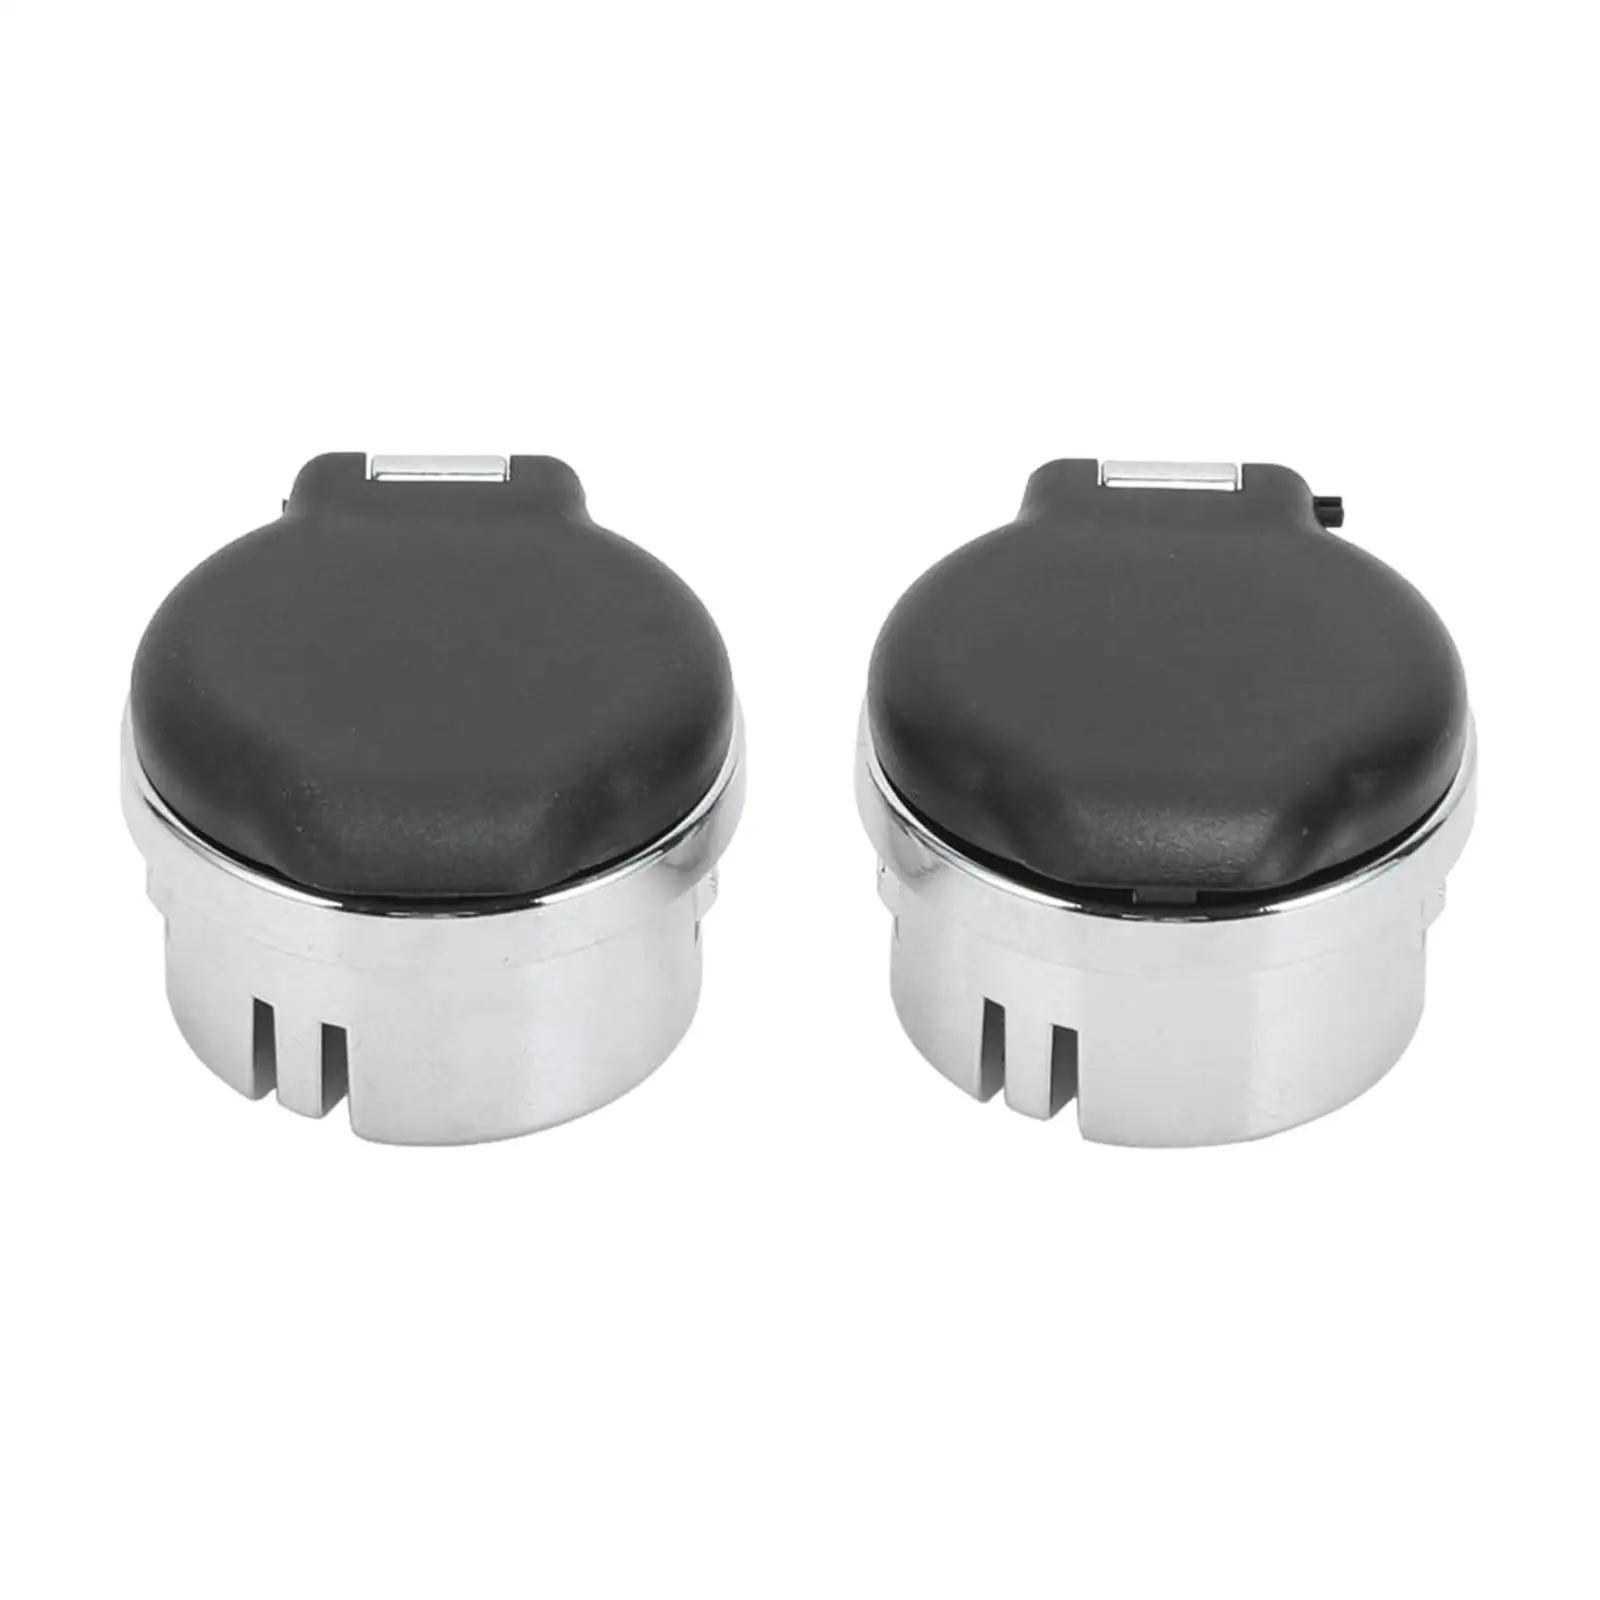 2 Pieces Dash Power Outlet Covers 20983936 12V Cigarette Lighter Plug Cover for Chevrolet Sierra Tahoe High Quality Replace